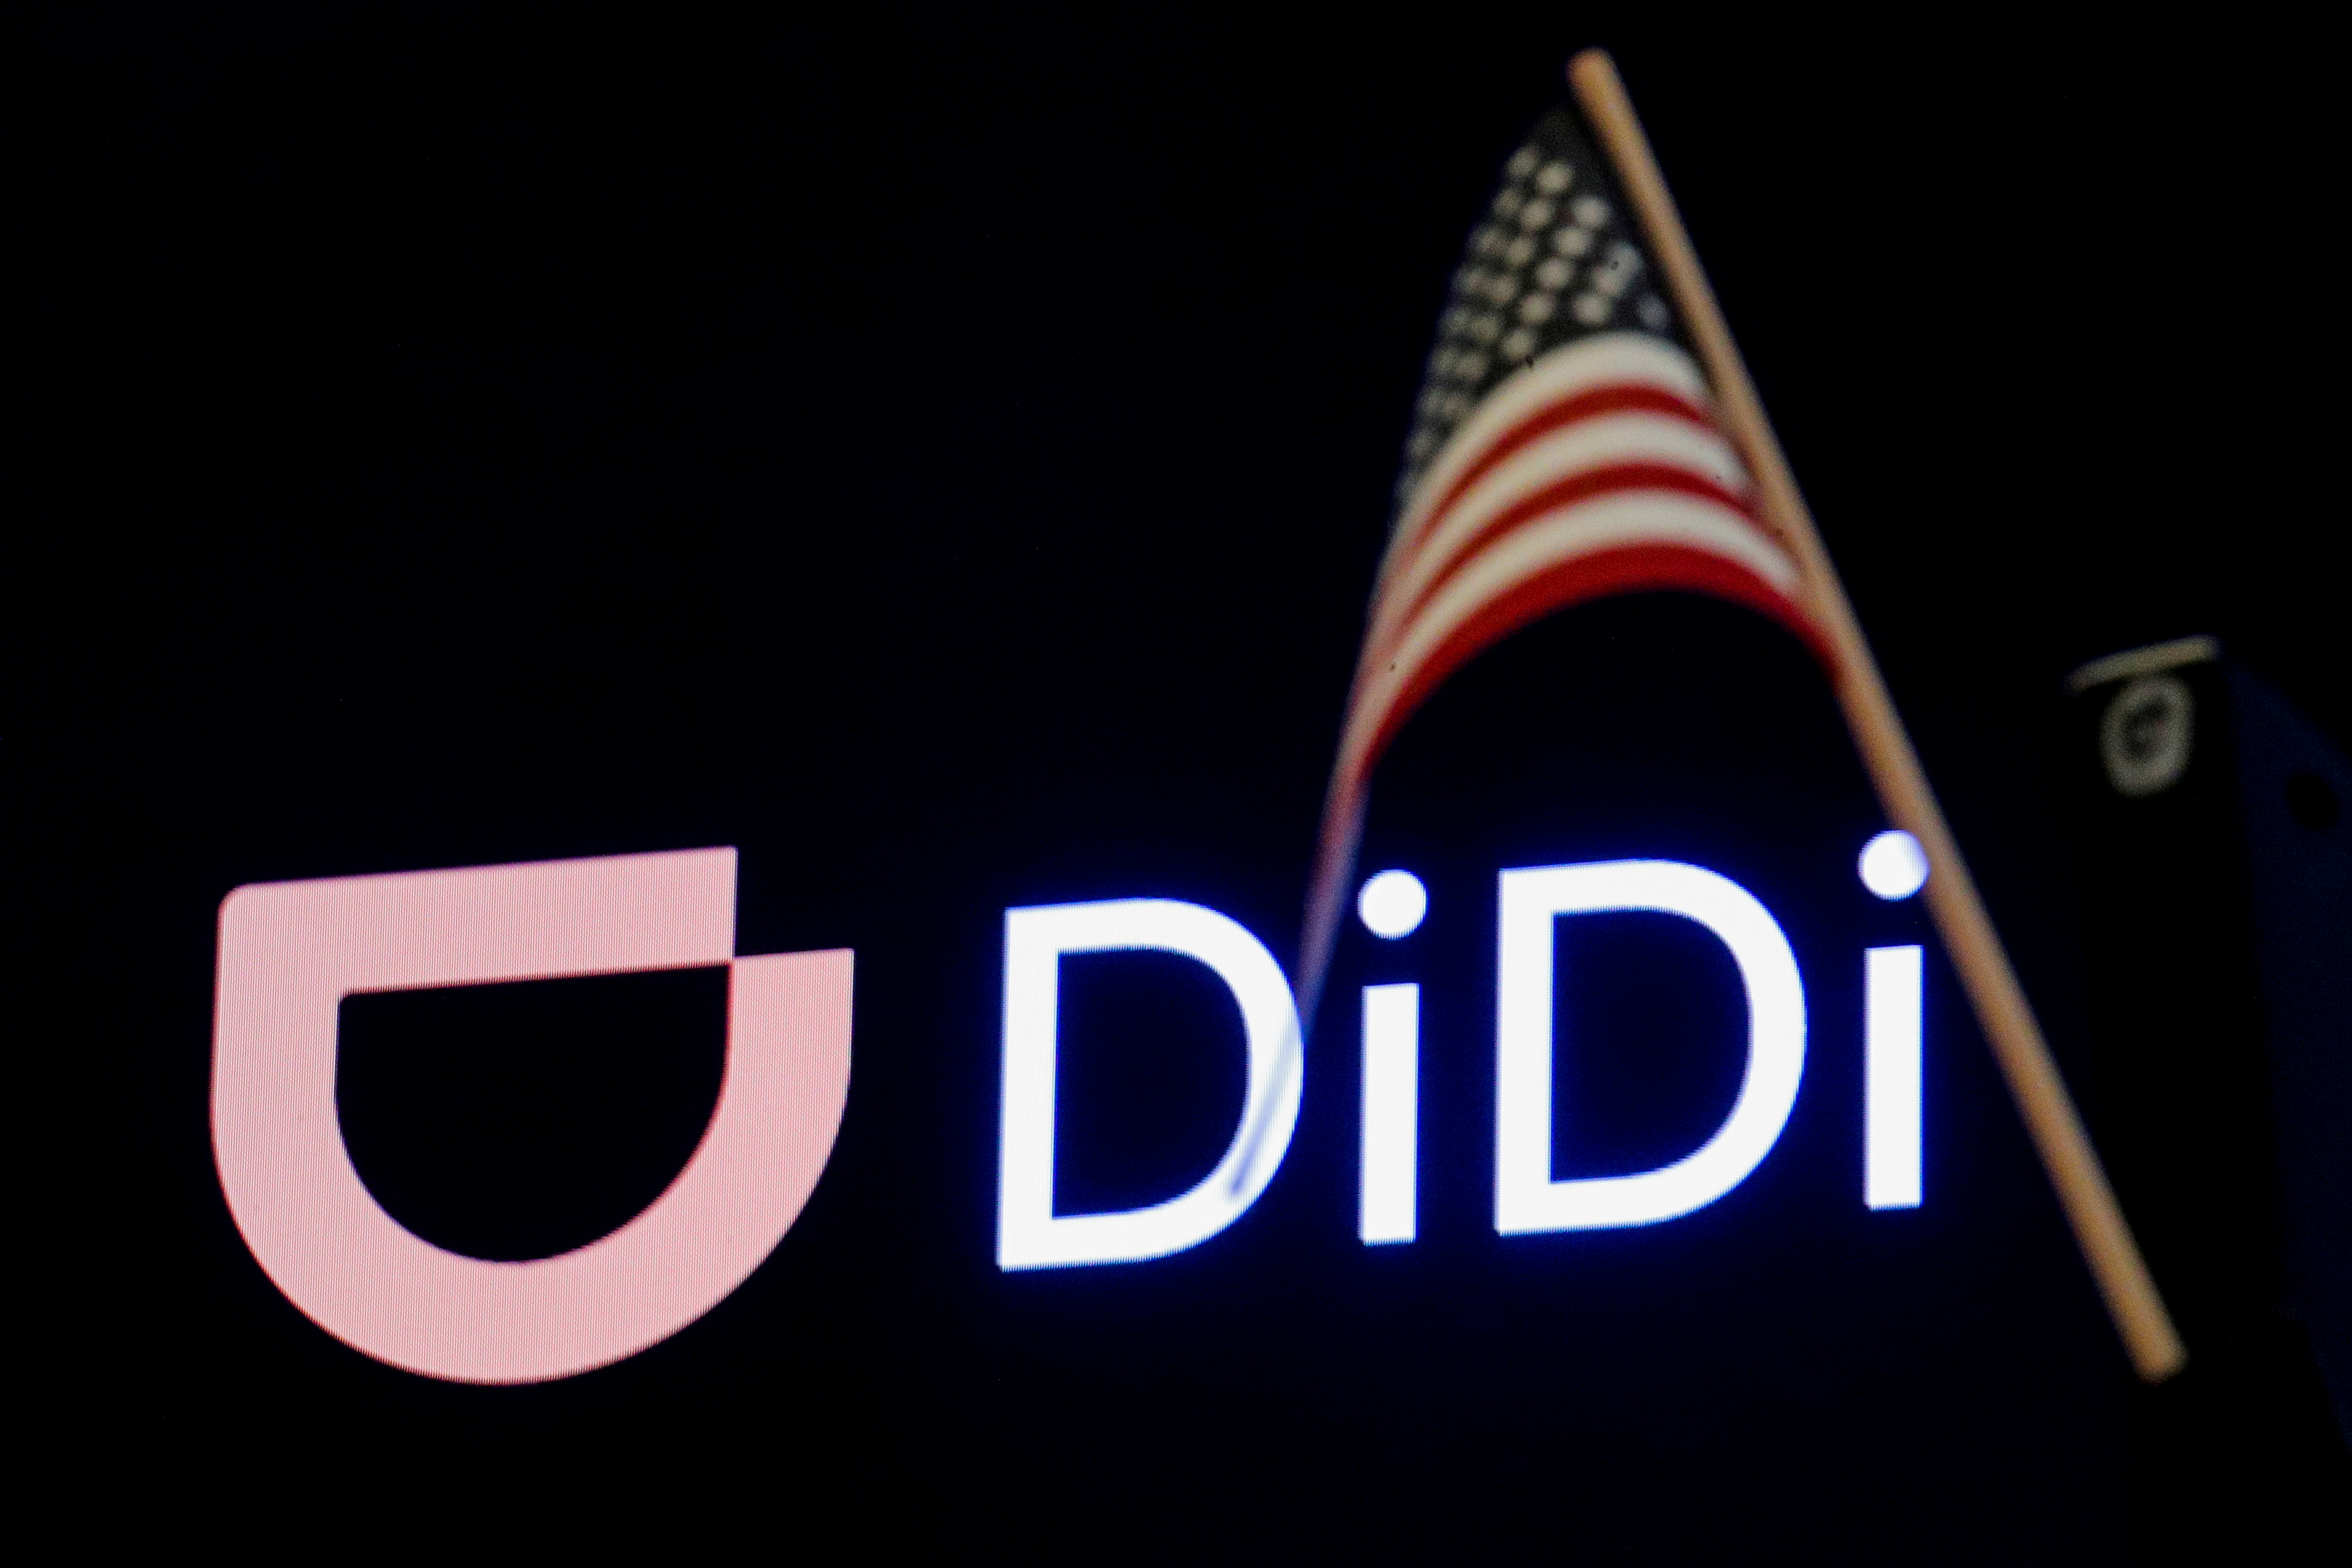 An American flag is pictured in front of the logo for Chinese ride hailing company Didi Global Inc. during the IPO on the New York Stock Exchange (NYSE) floor in New York City, U.S., June 30, 2021. REUTERS/Brendan McDermid/File Photo